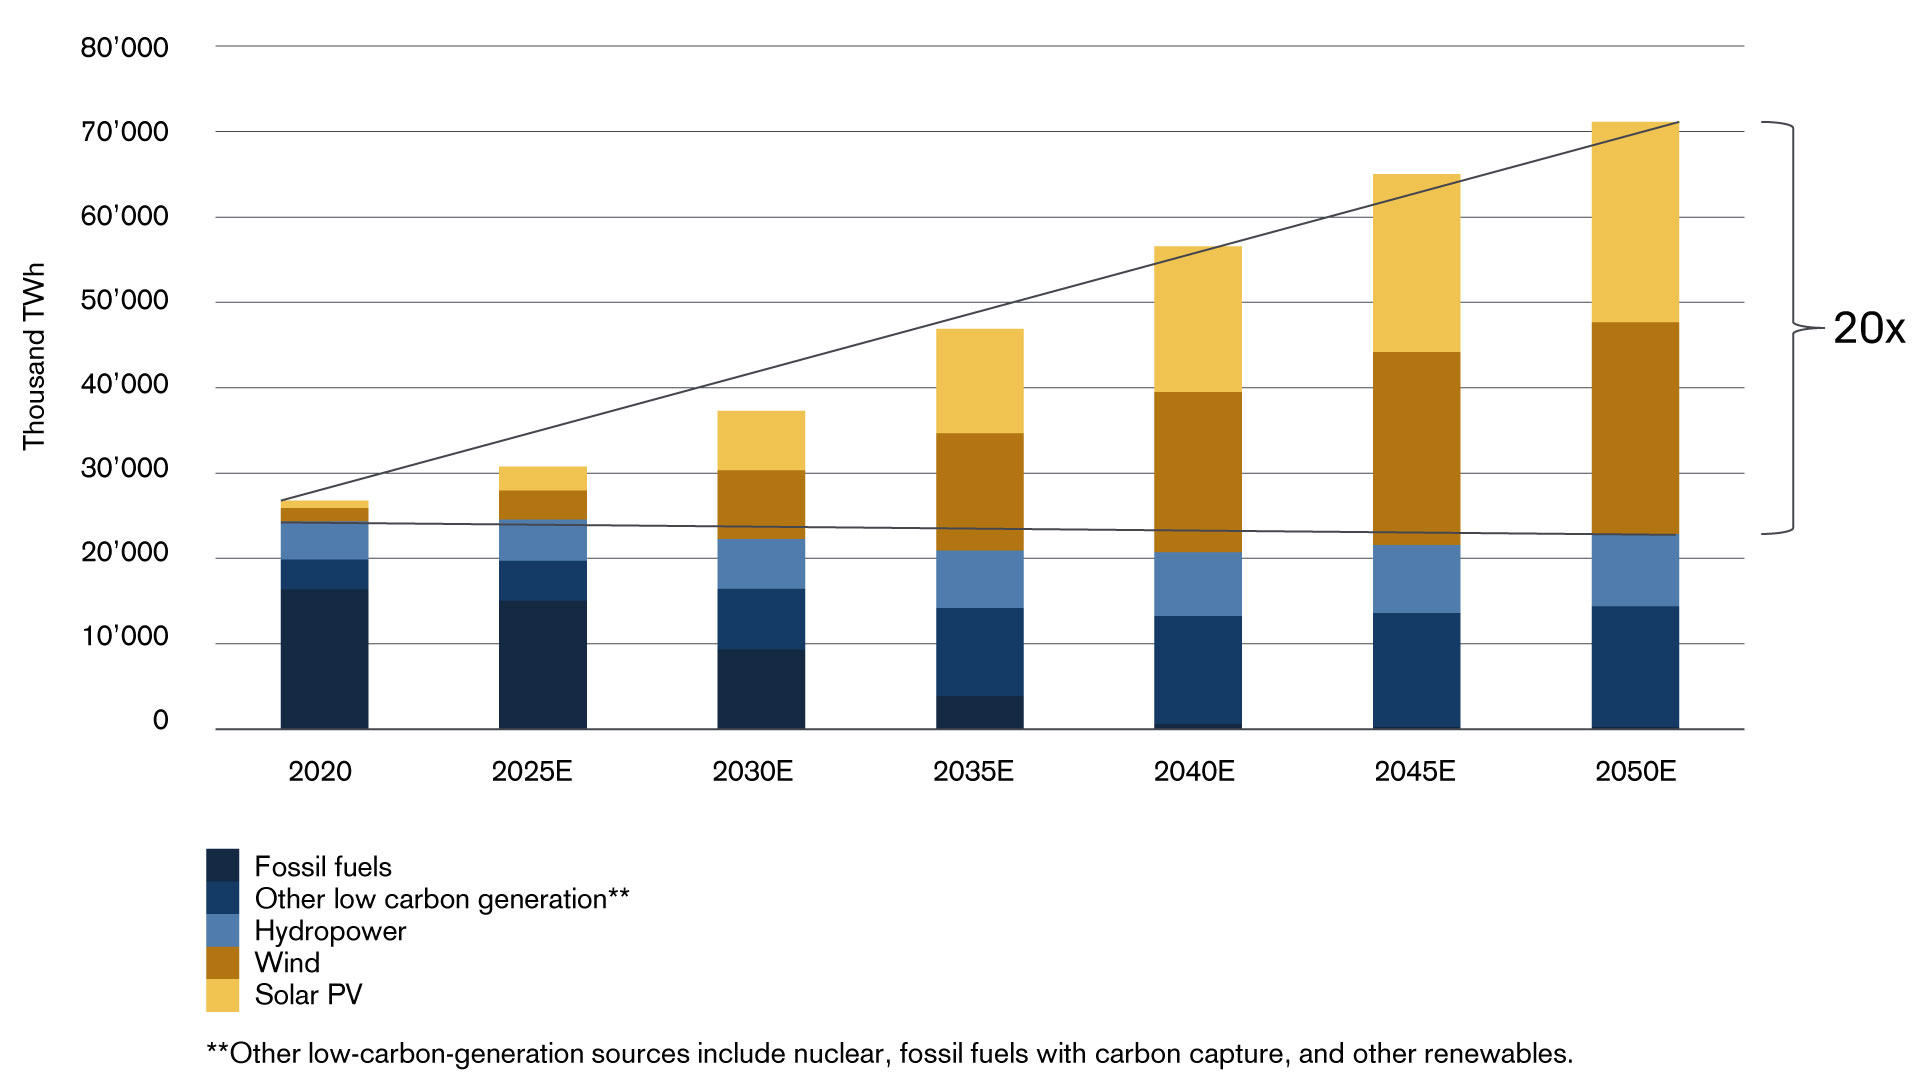 Figure 3: More renewables needed to meet growing demand for electricity